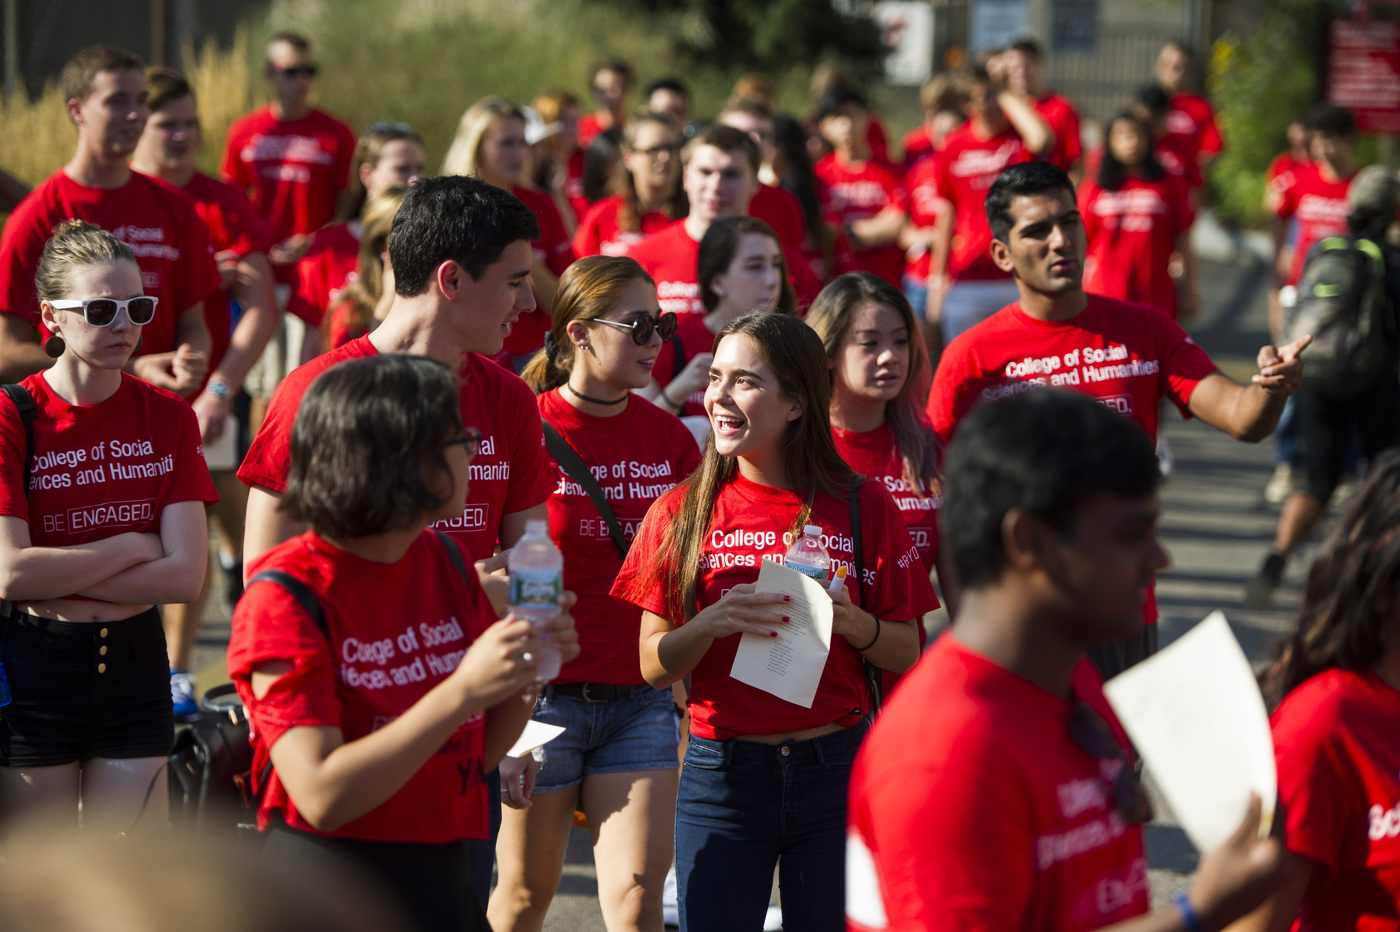 Lots of students wearing red "College of social sciences and humanities" shirts